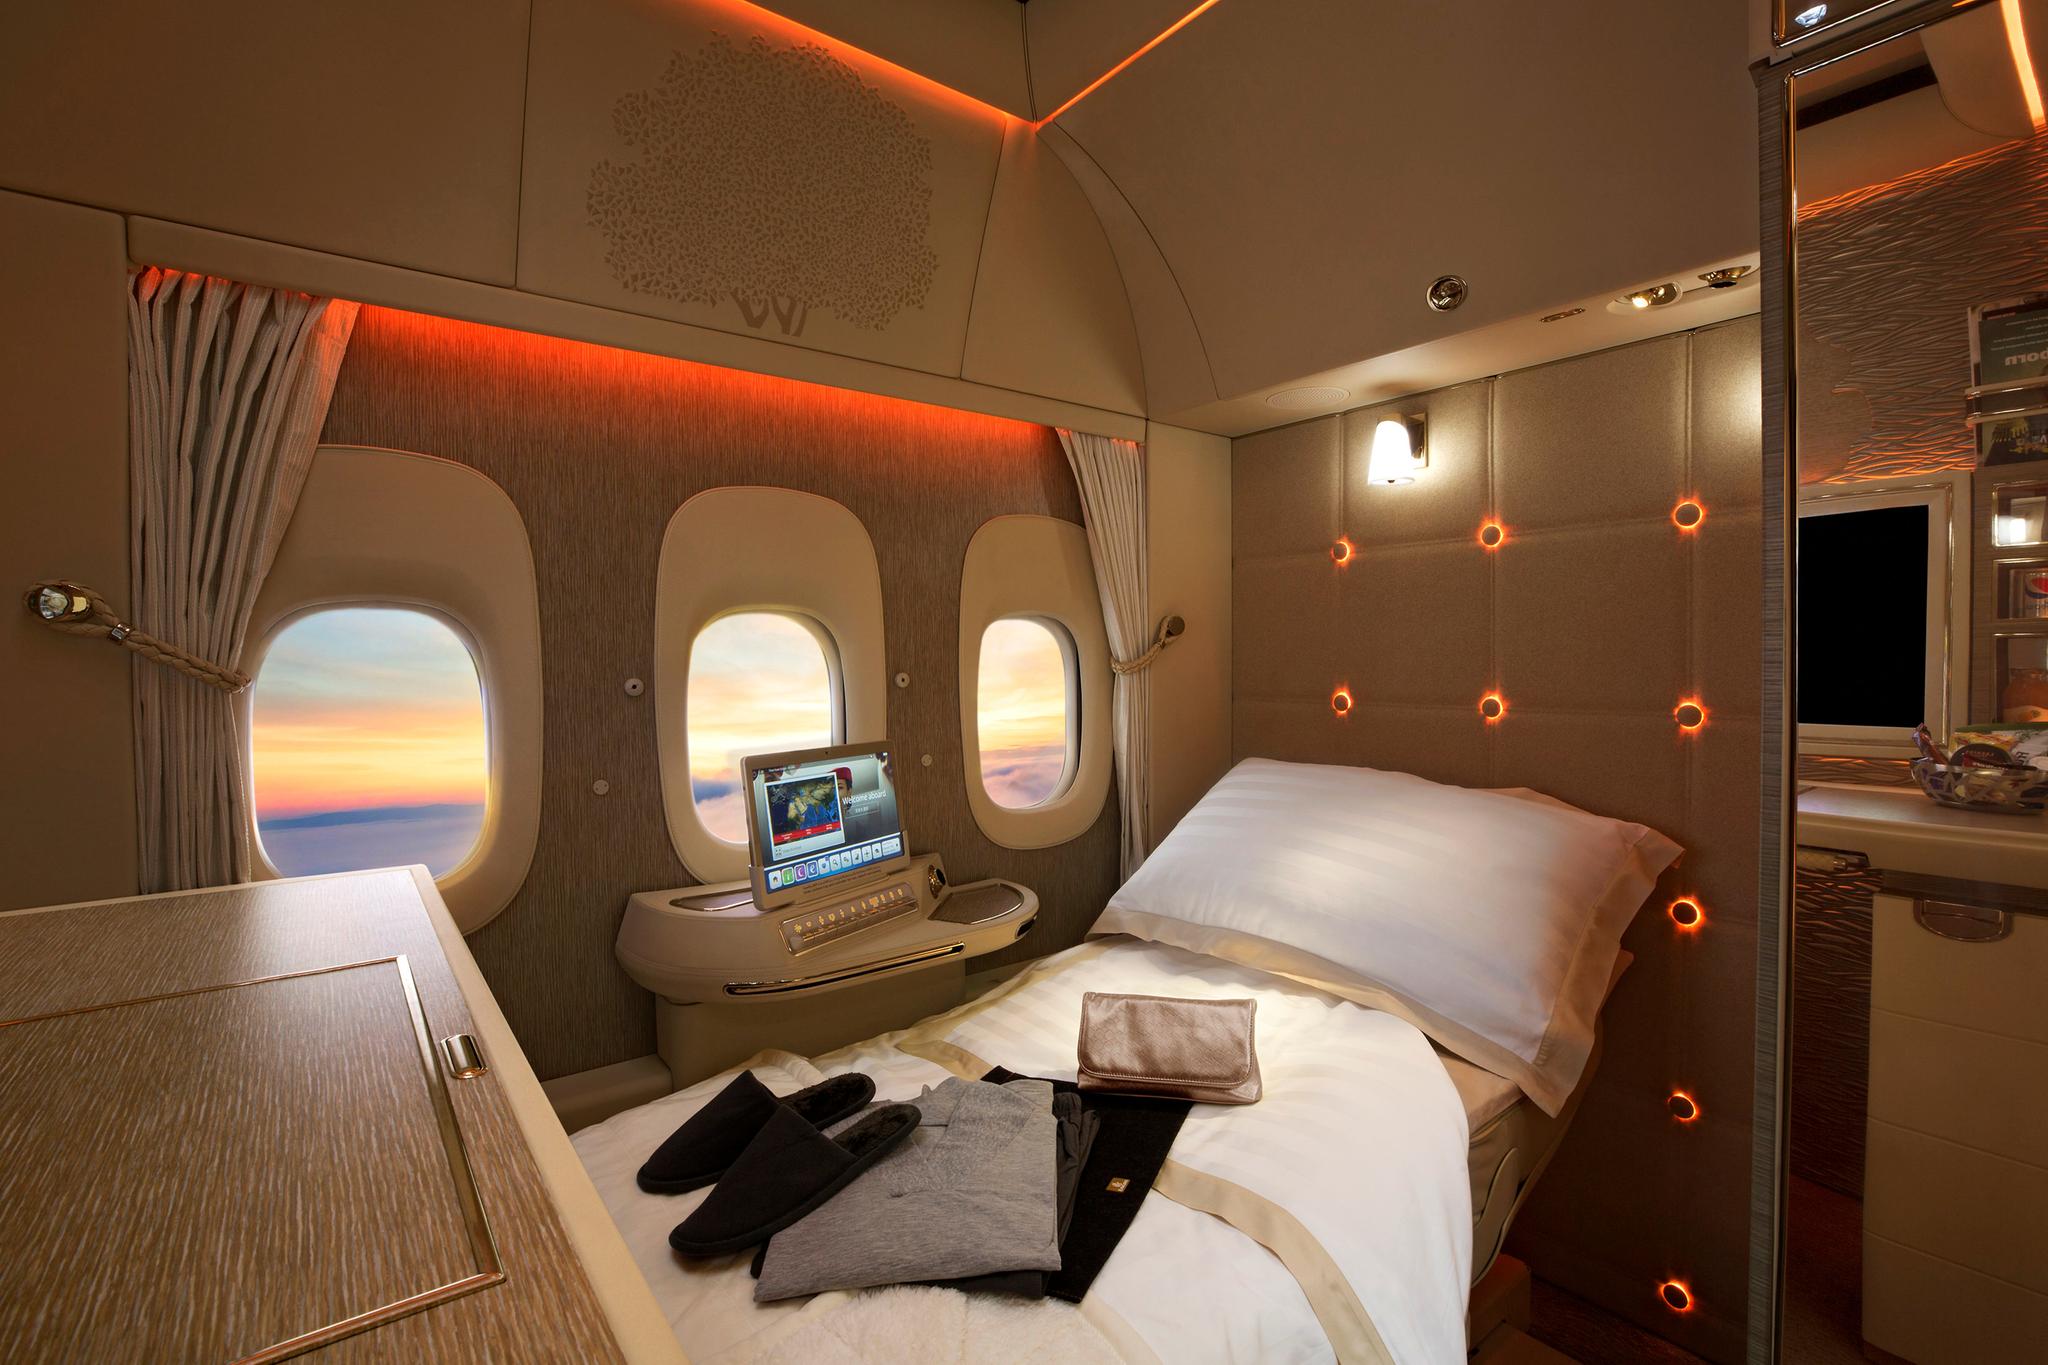 Emirates Eliminating First Class From Boeing 777 200lr Fleet